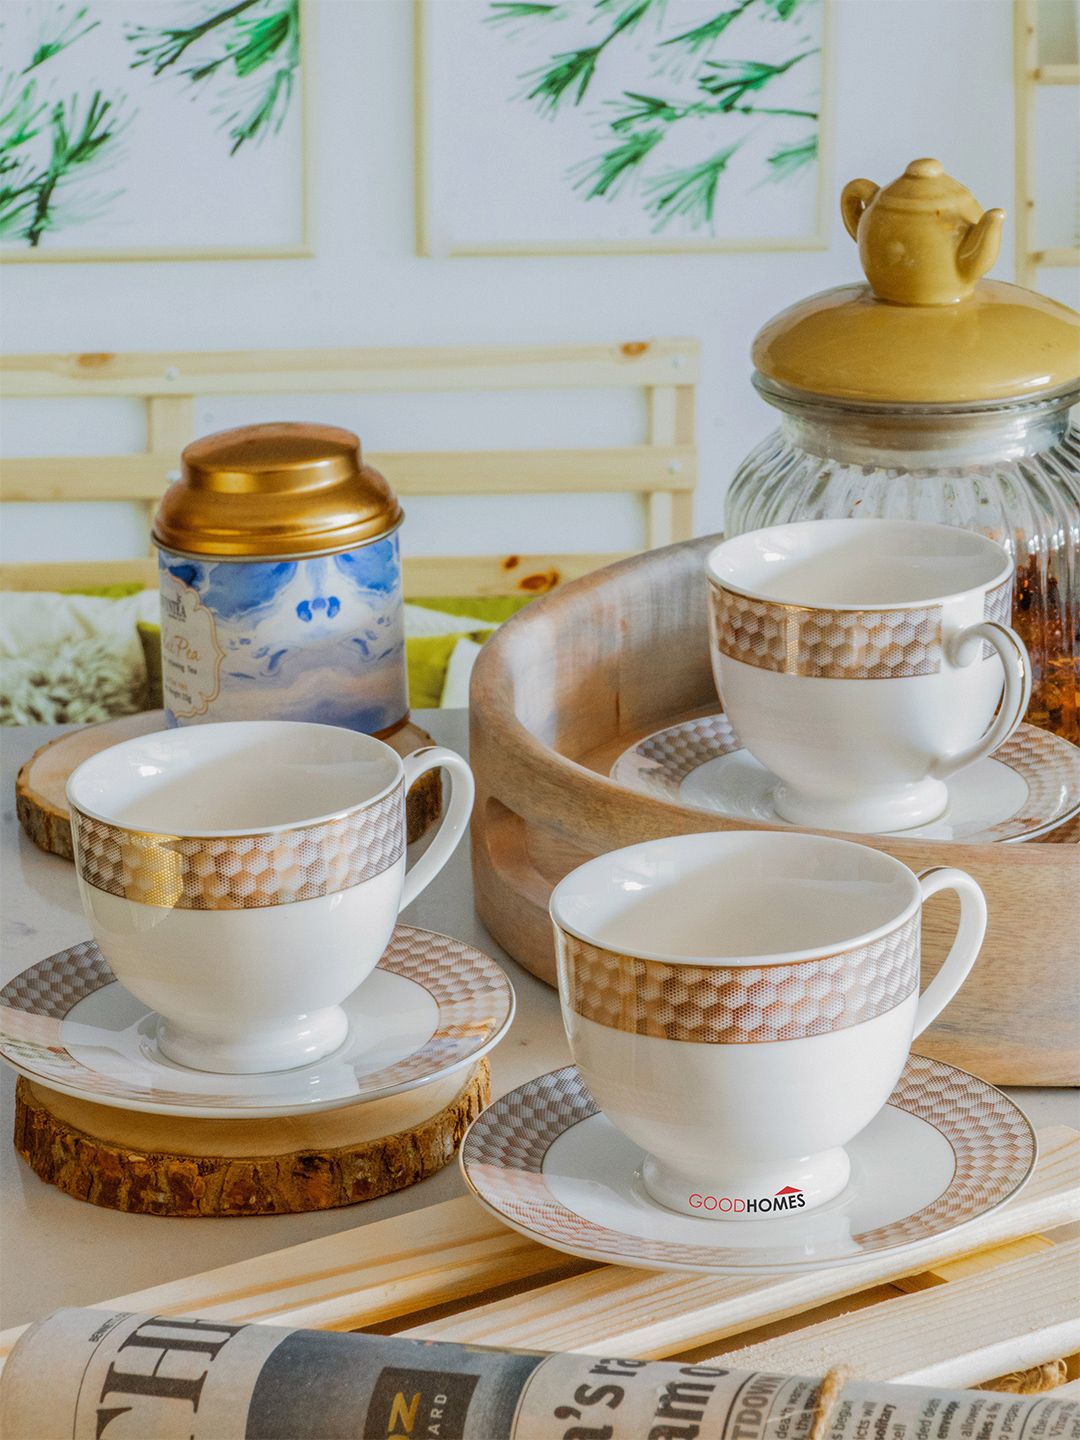 GOODHOMES Set of 6 White & Gold-Toned Printed Porcelain Glossy Cups and Saucers Price in India